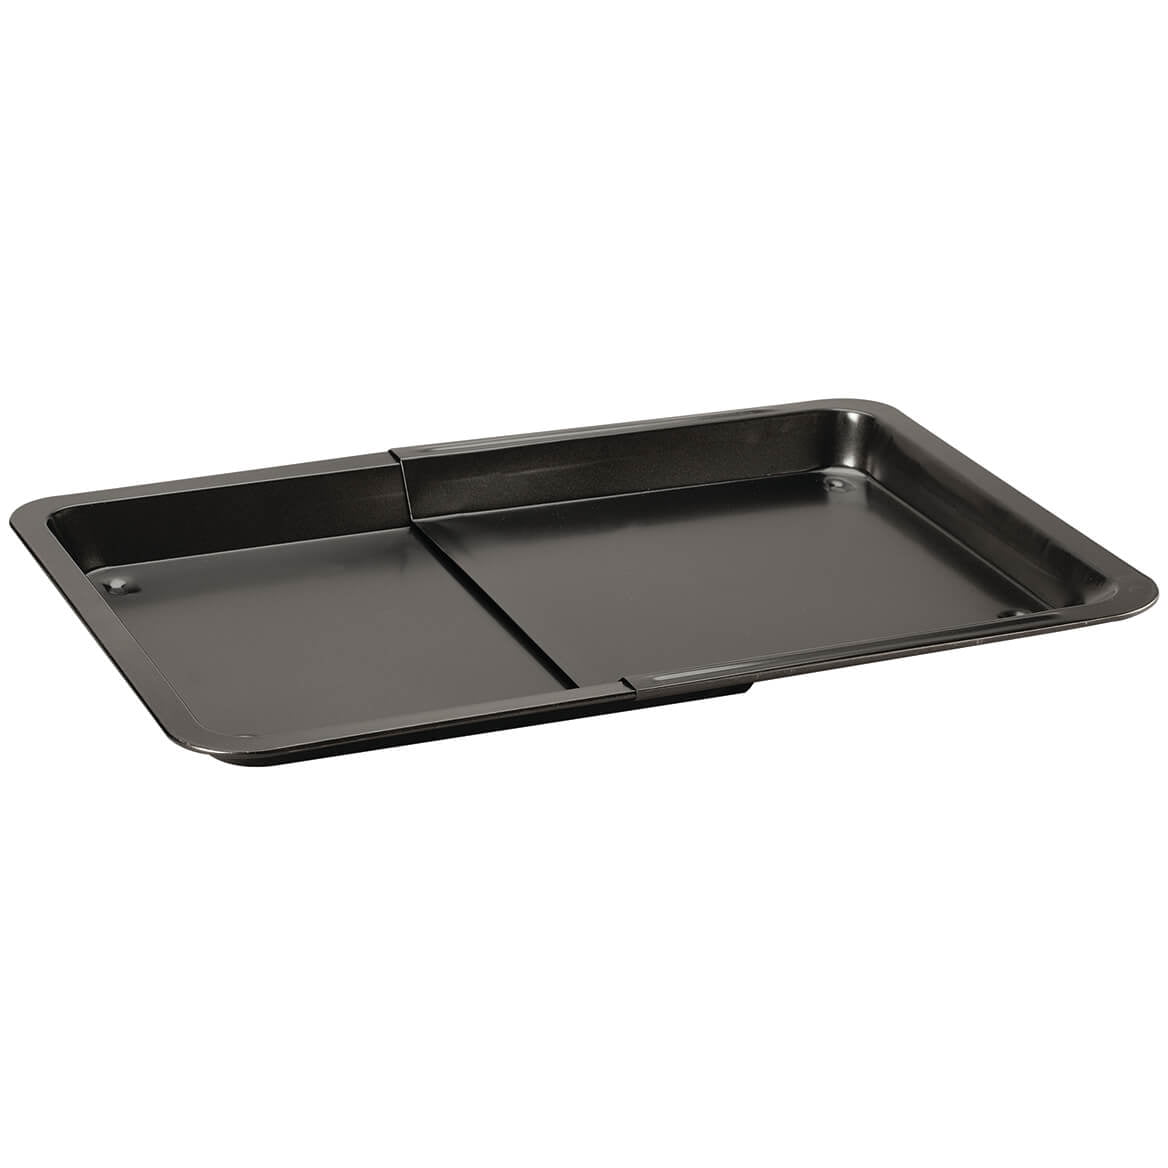 1pc Square Carbon Steel Baking Pan, Non-stick Flat Baking Tray For